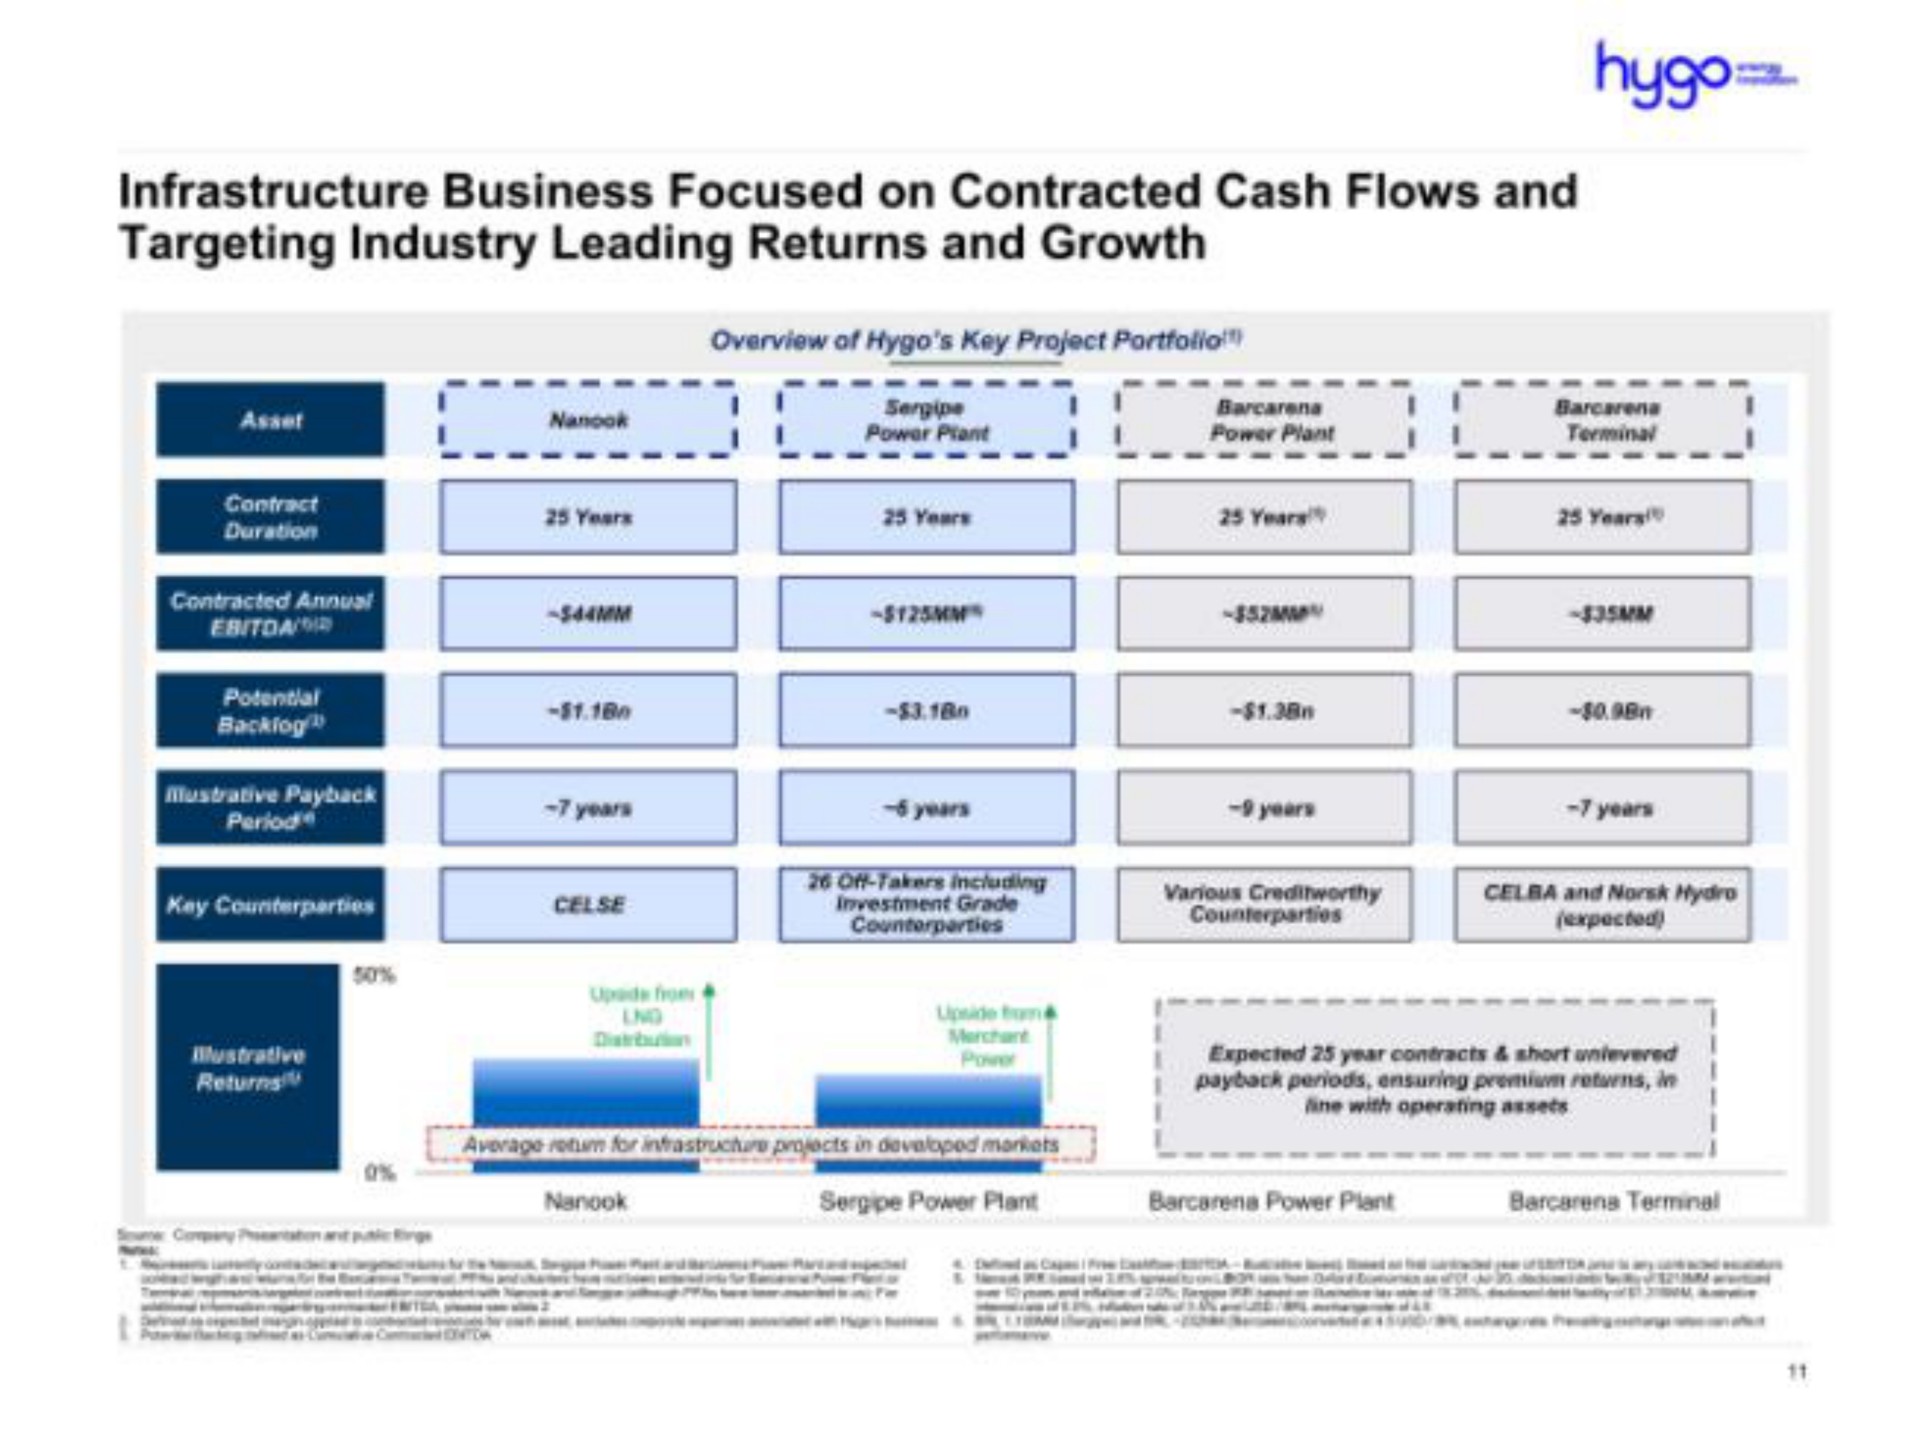 targeting industry leading returns and growth | Hygo Energy